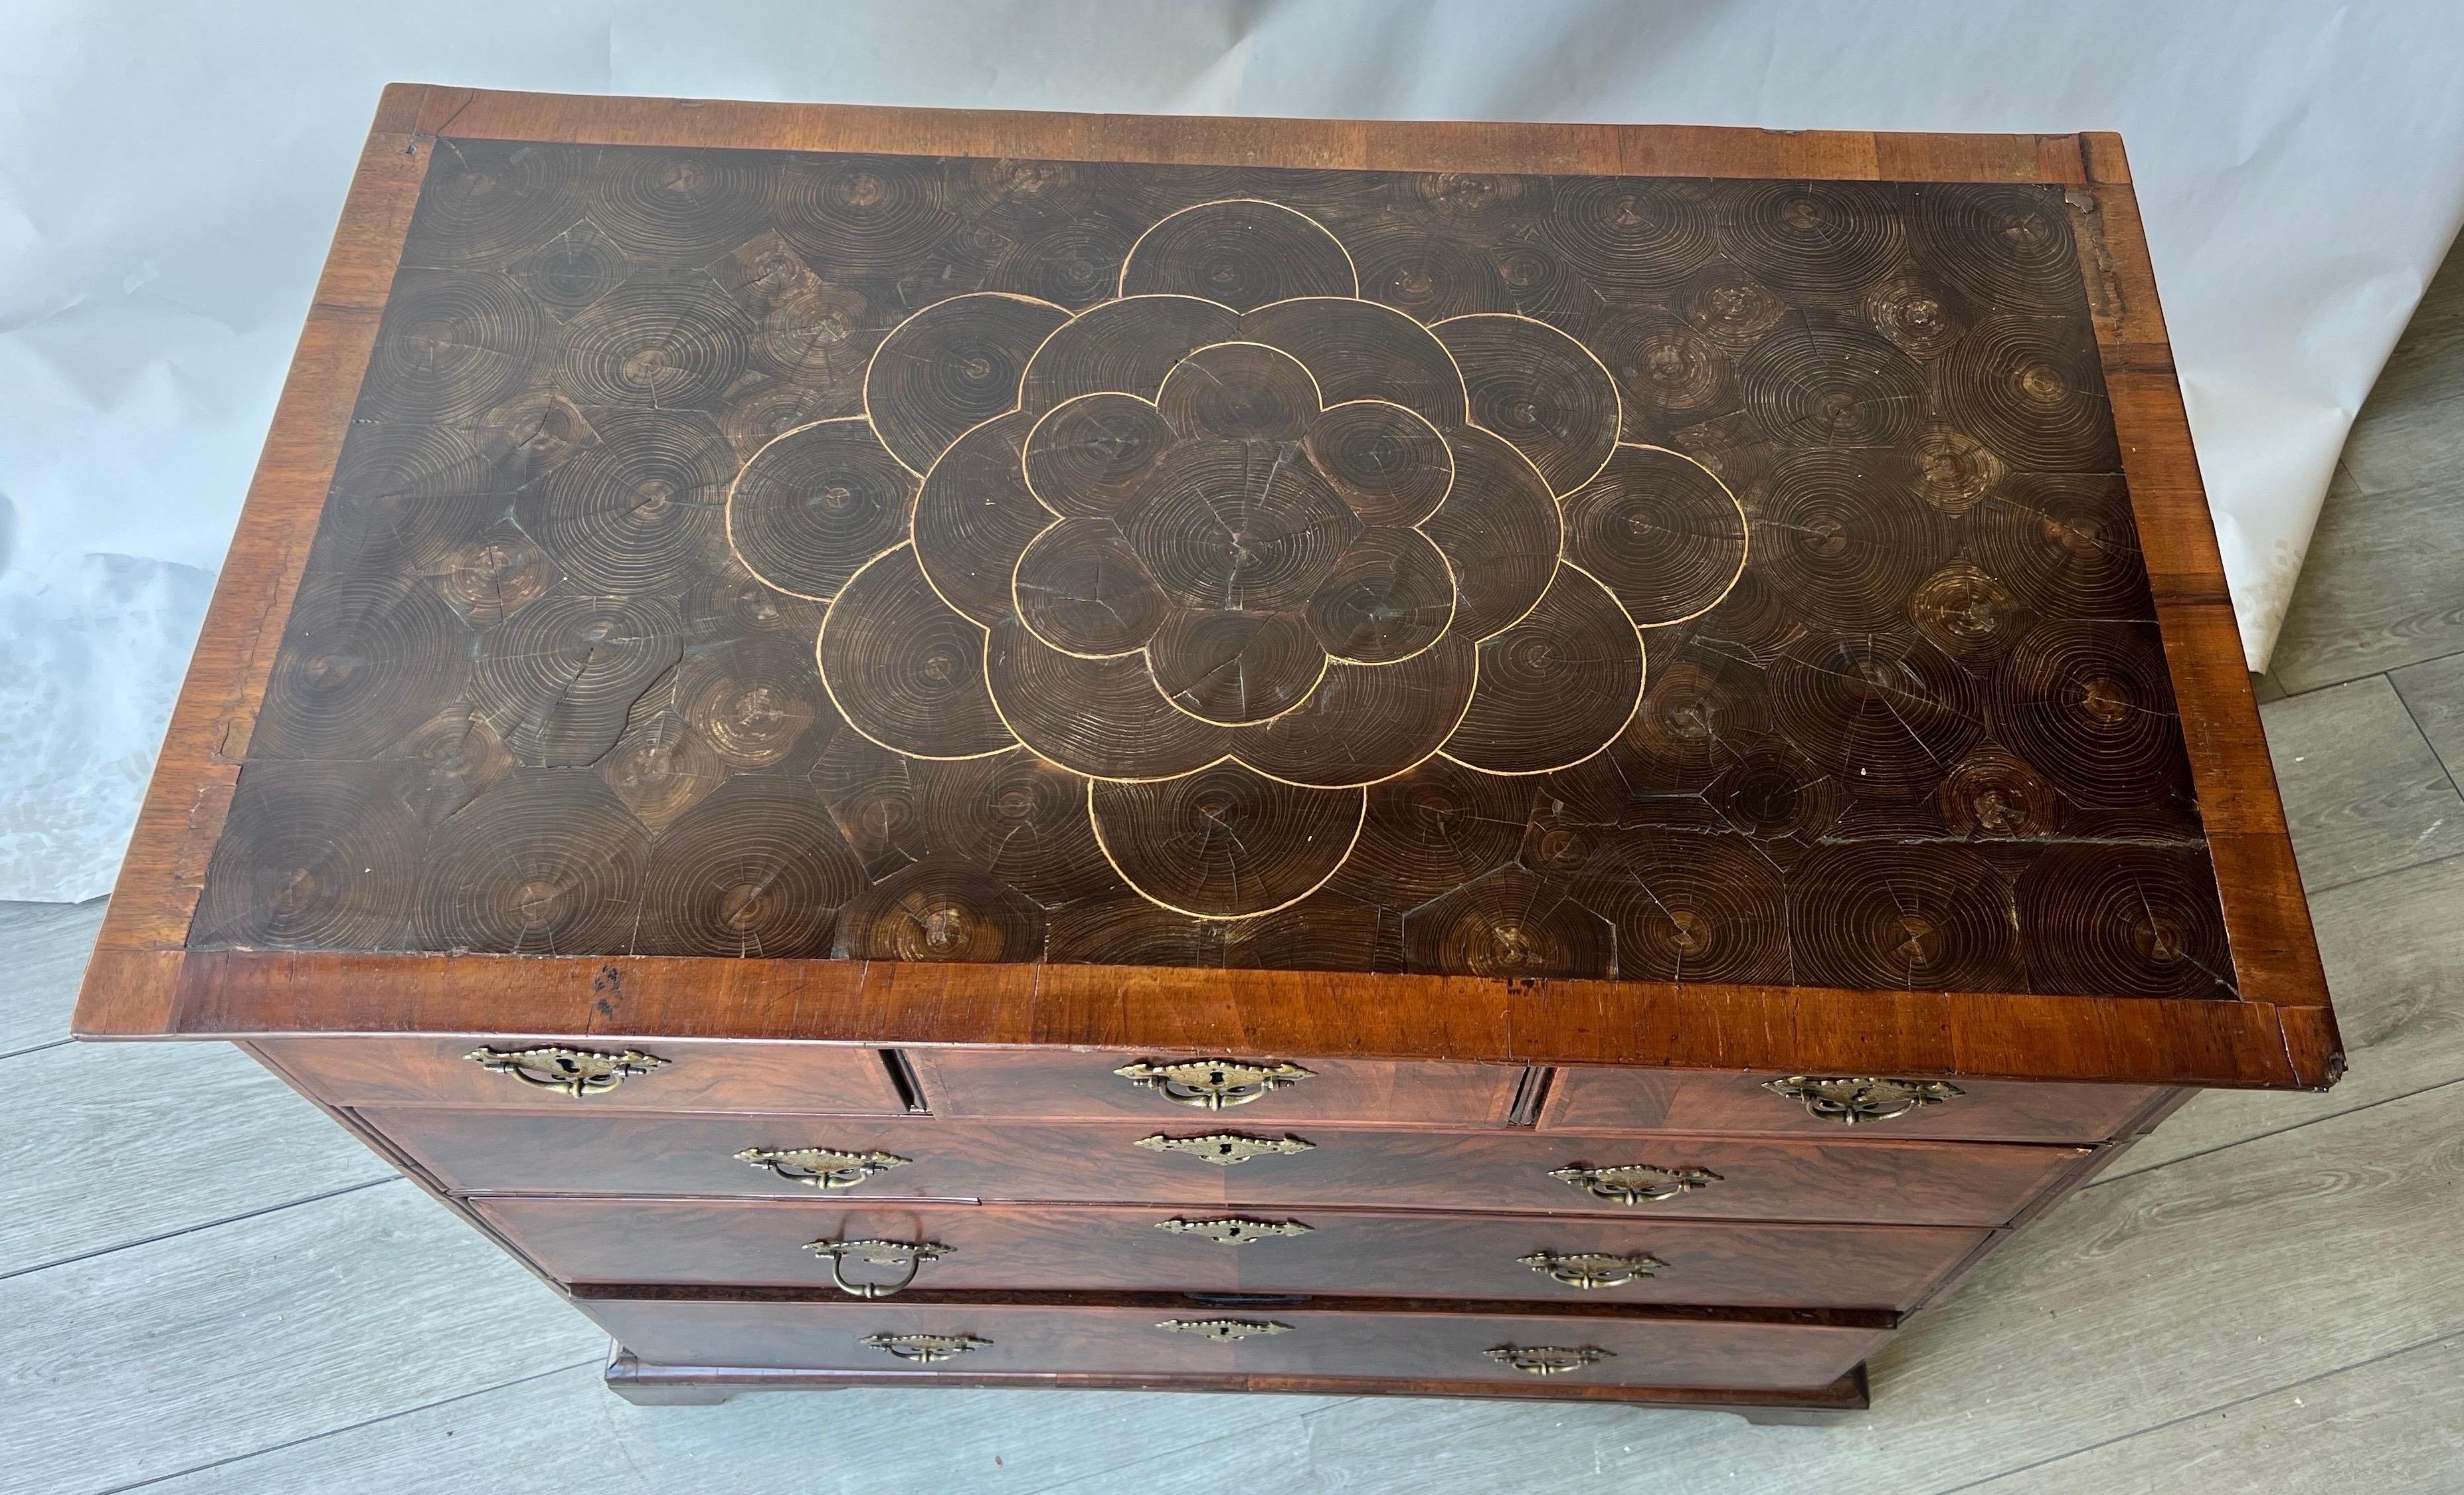 Gorgeous early 18th century  inlaid oyster veneered William and Mary period English chest. Top is string inlaid with a floral motif over traditional oyster sliced veneer and banded around the perimeter. The drawer faces feature Herringbone inlay and